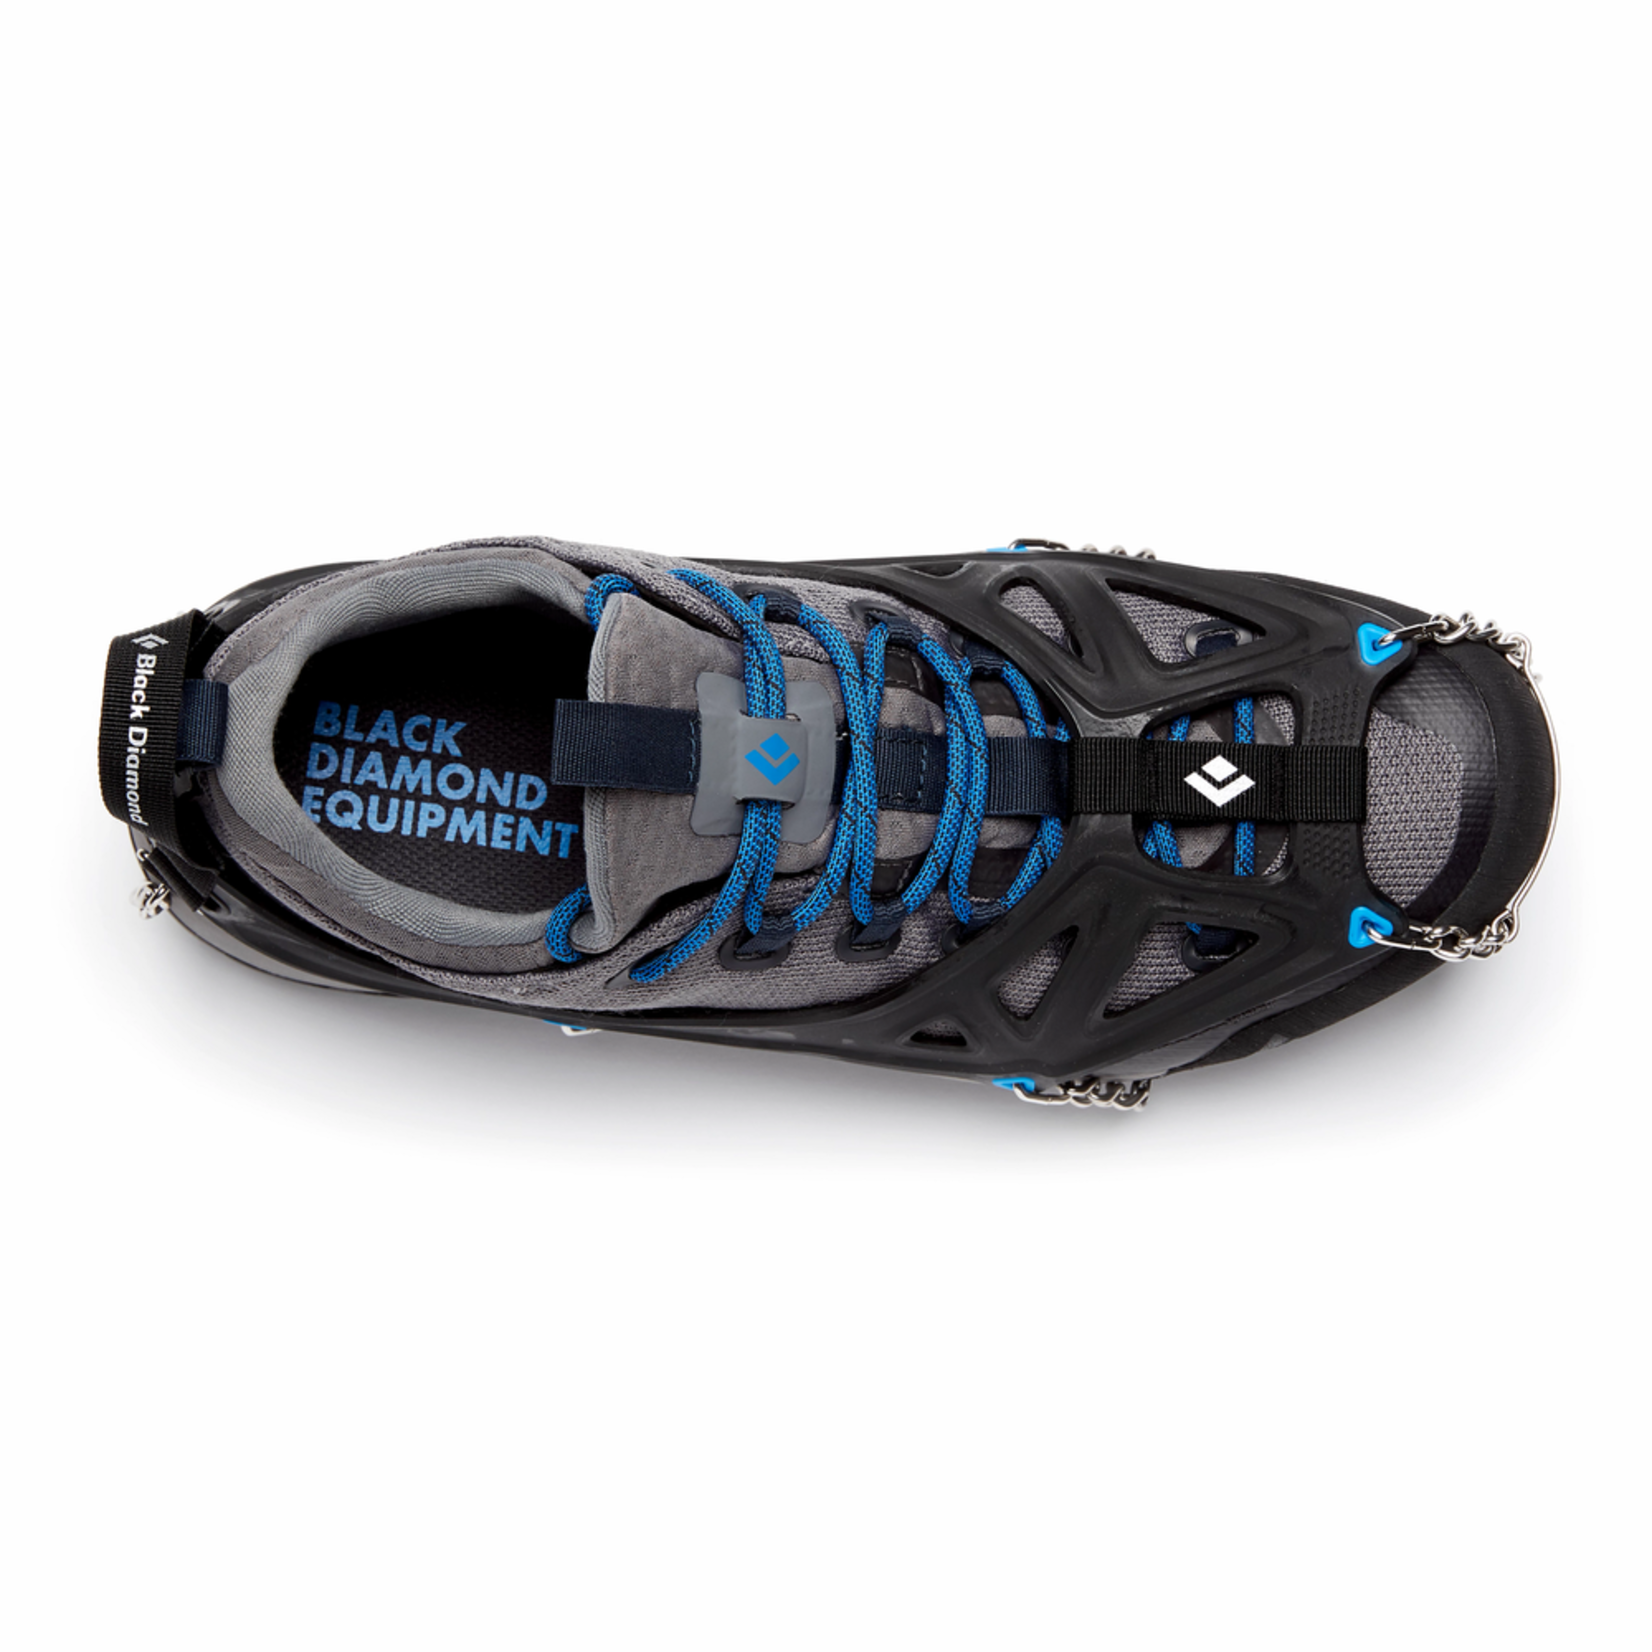 Black Diamond Crampons Access Spike Traction Device